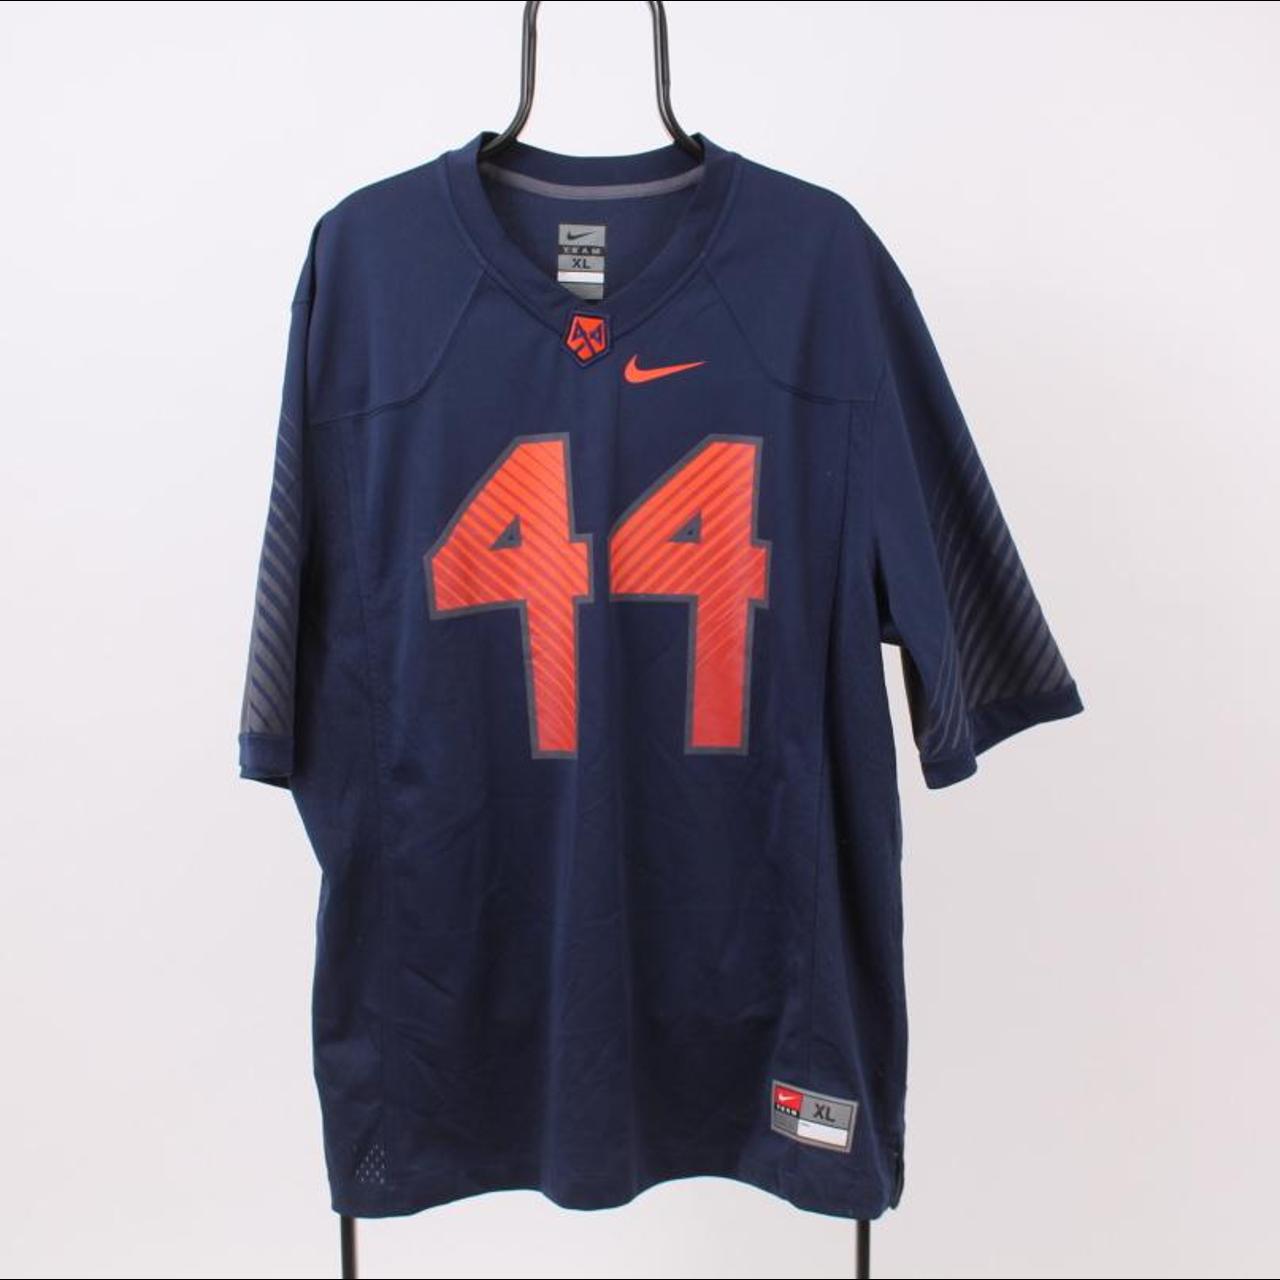 Product Image 1 - Nike American football jersey 
Colour: